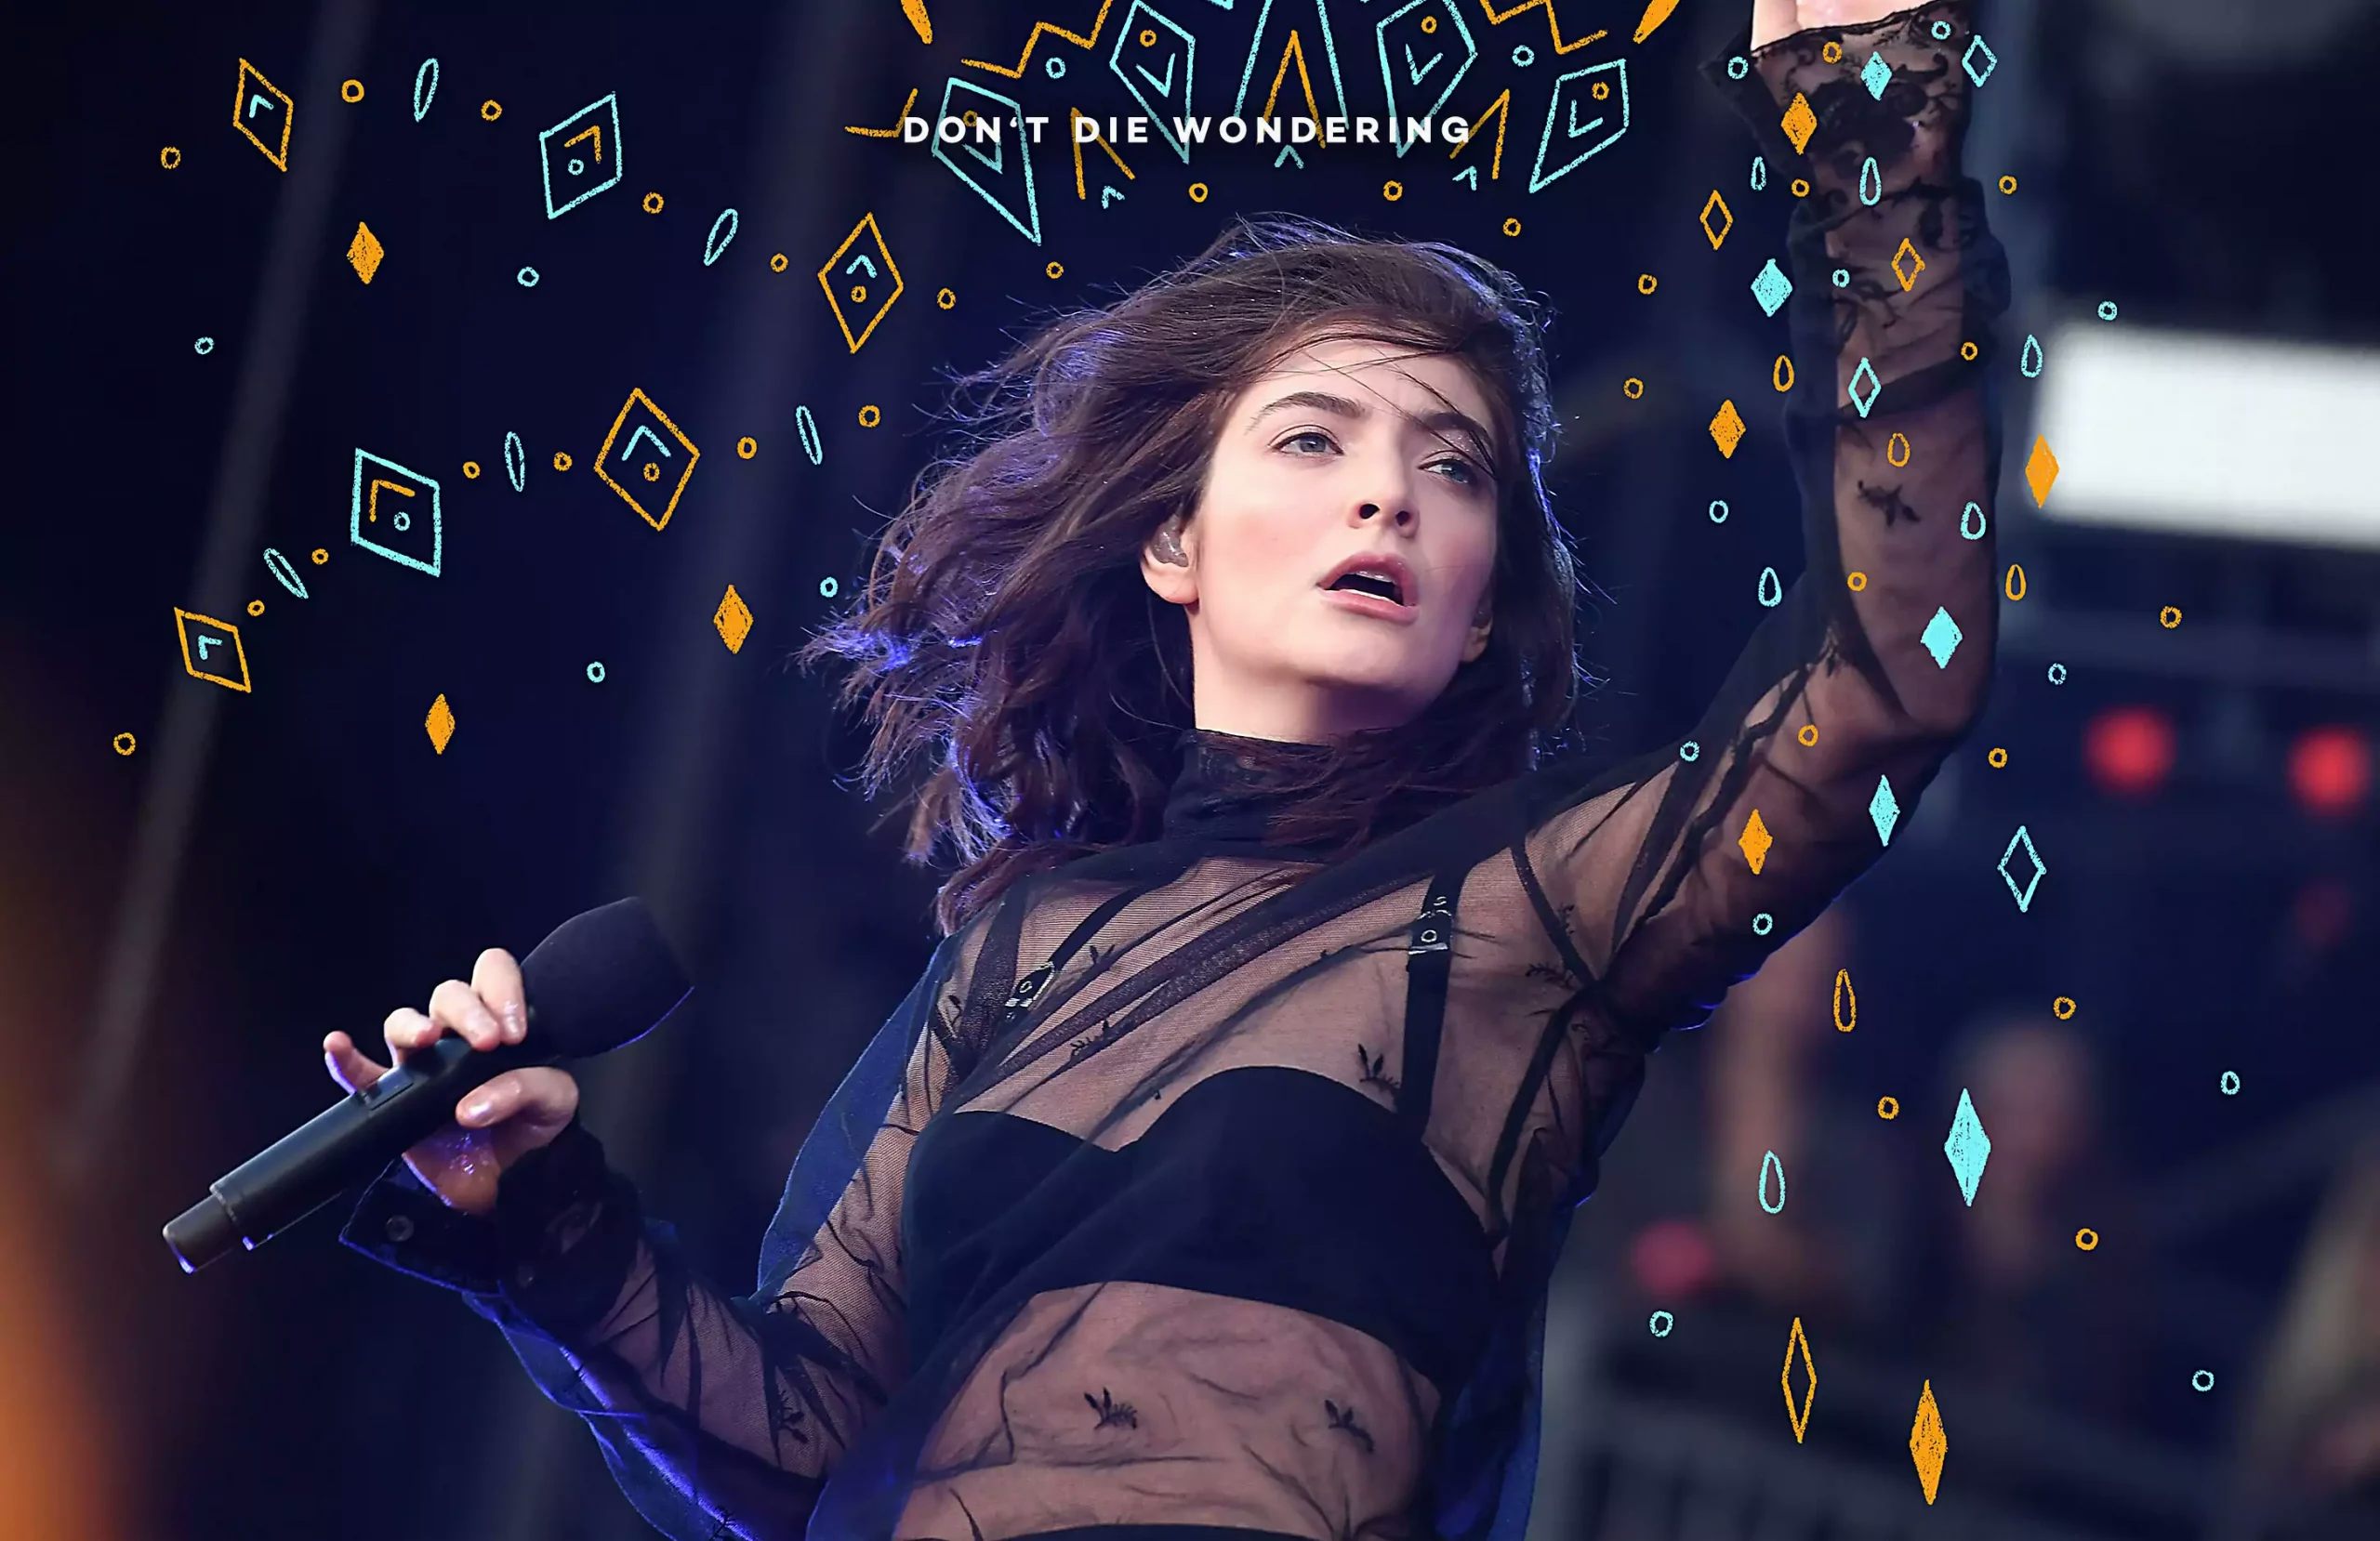 Lorde: “I’ve Learned To Breathe Out And Tune In”